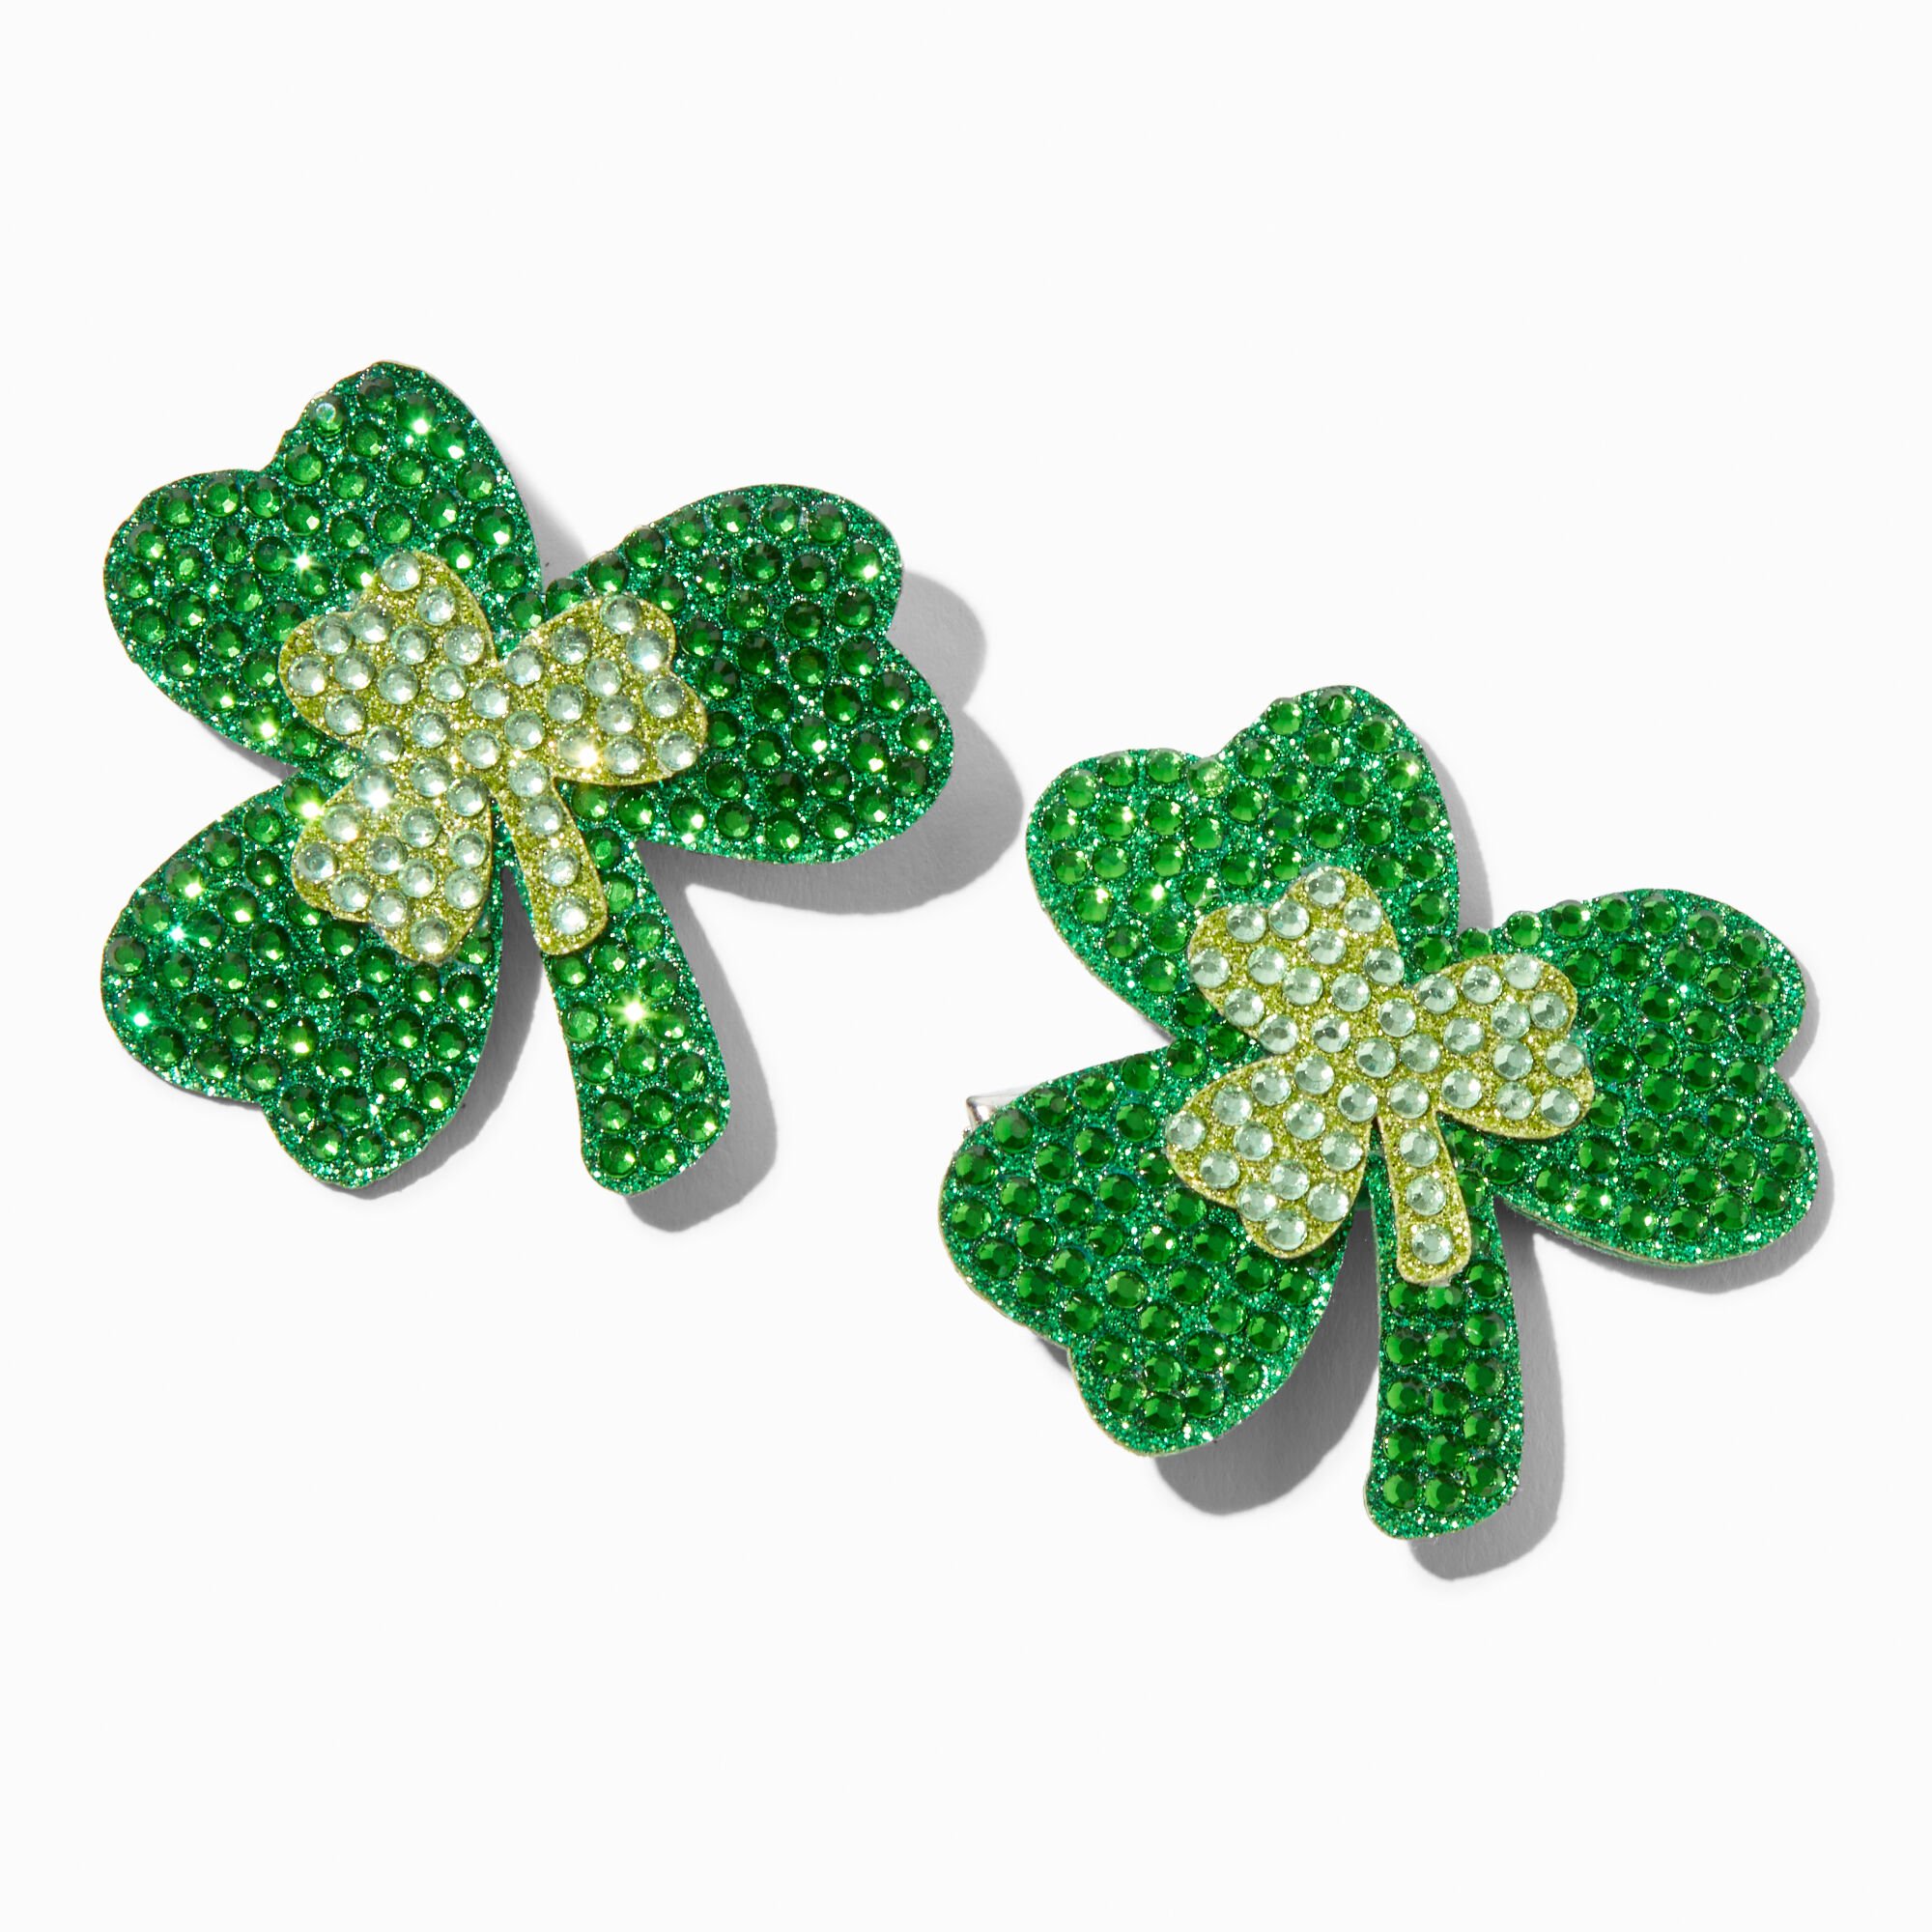 View Claires Crystal Shamrock Hair Clips 2 Pack information